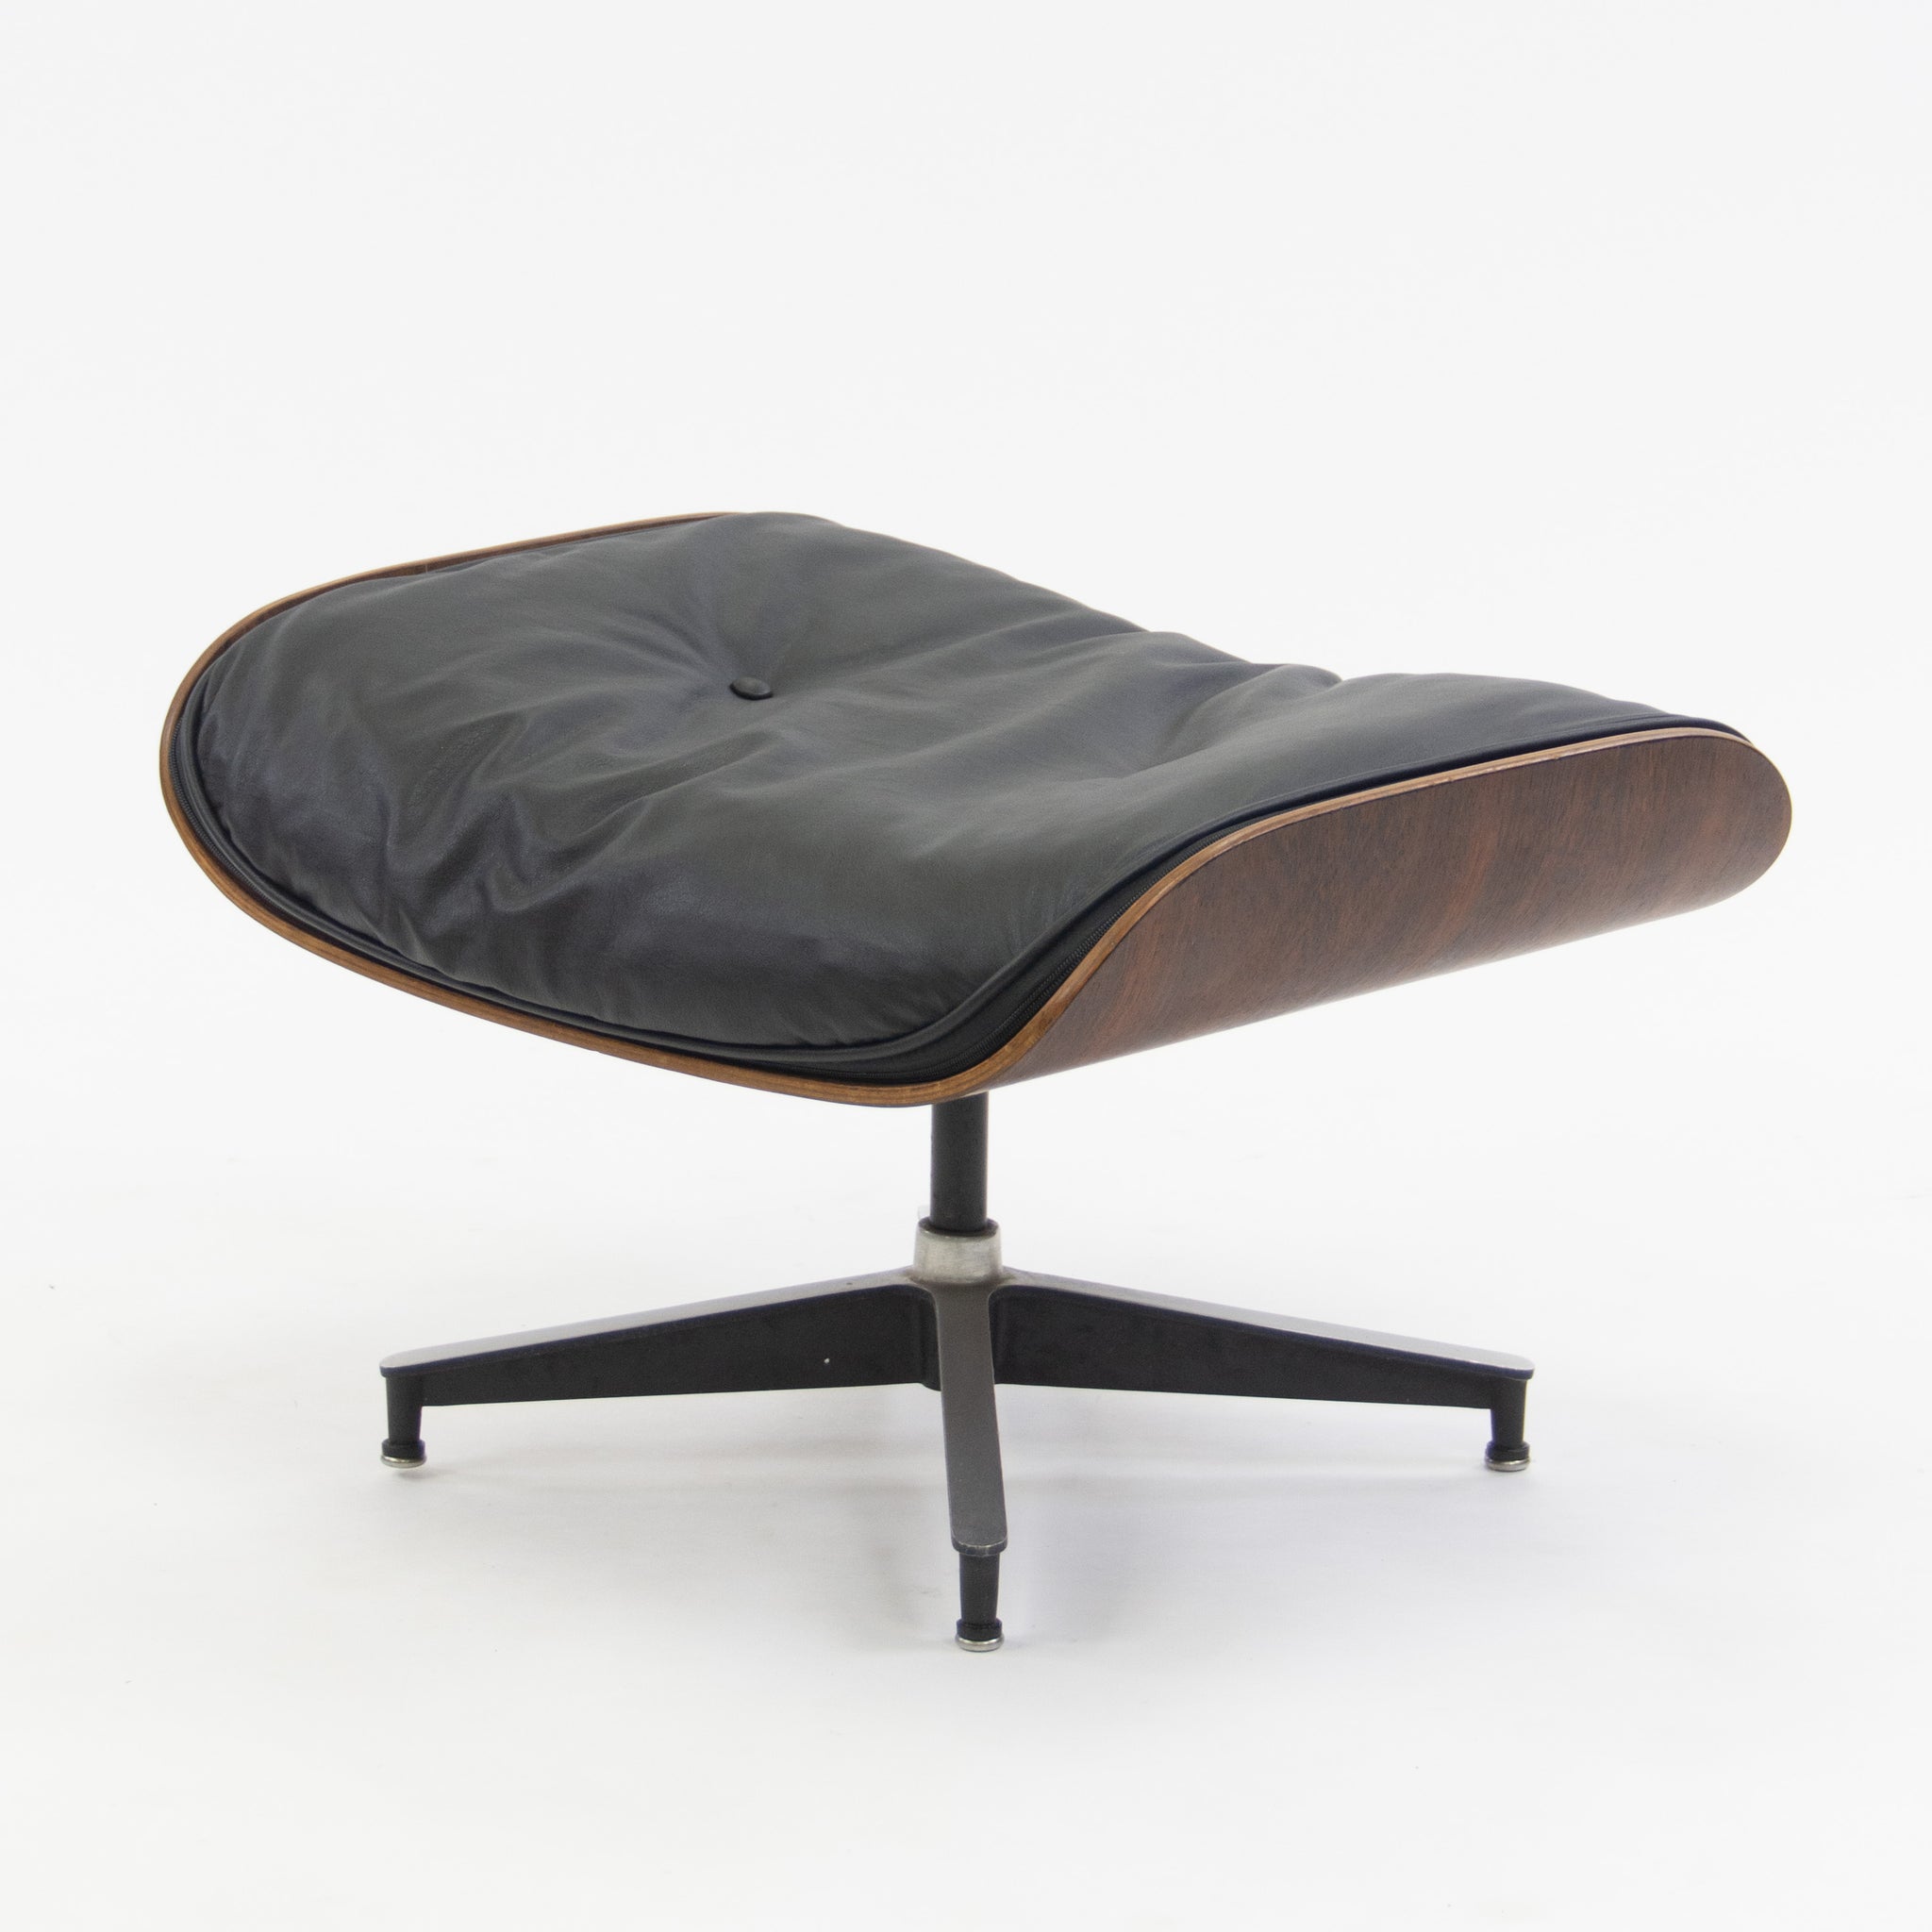 SOLD 1950's Herman Miller Eames Lounge Chair & Ottoman Rosewood 670 671 Black Leather